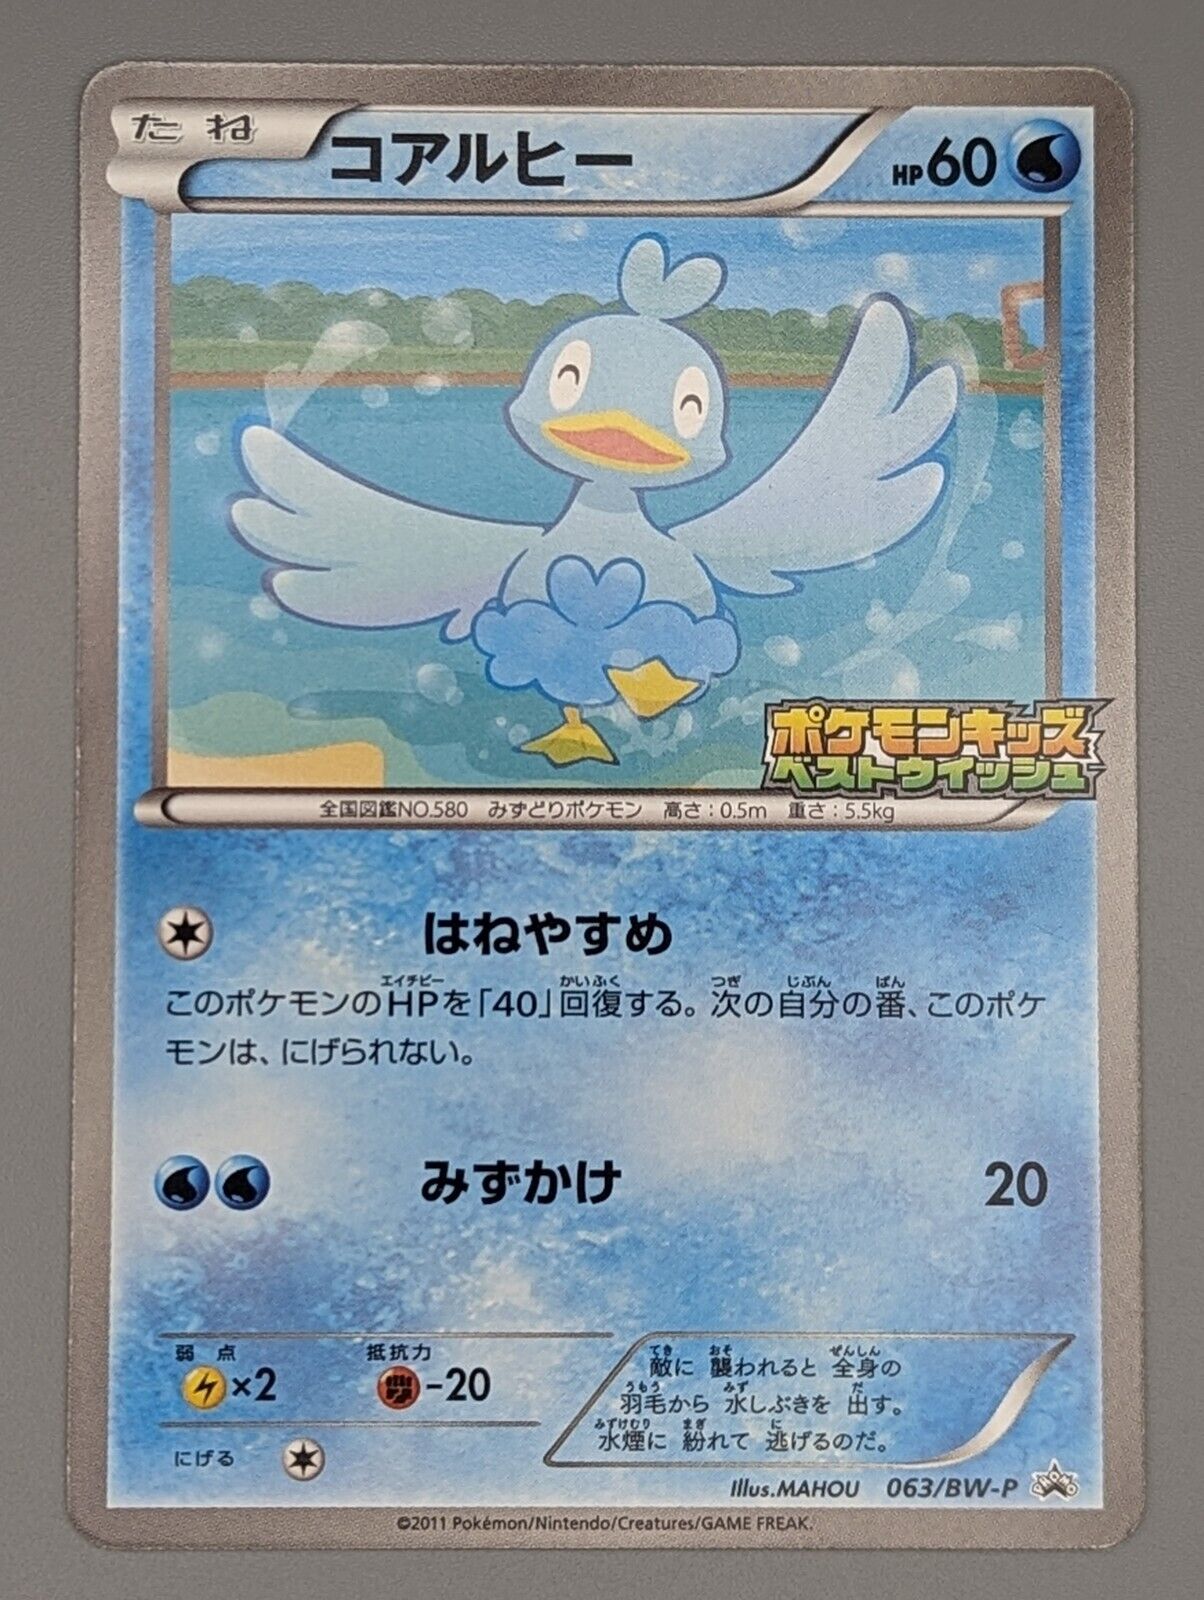 Ducklett 063/BW-P Special Toy Promo Stamped Japanese Pokemon Card(LP) UK Seller